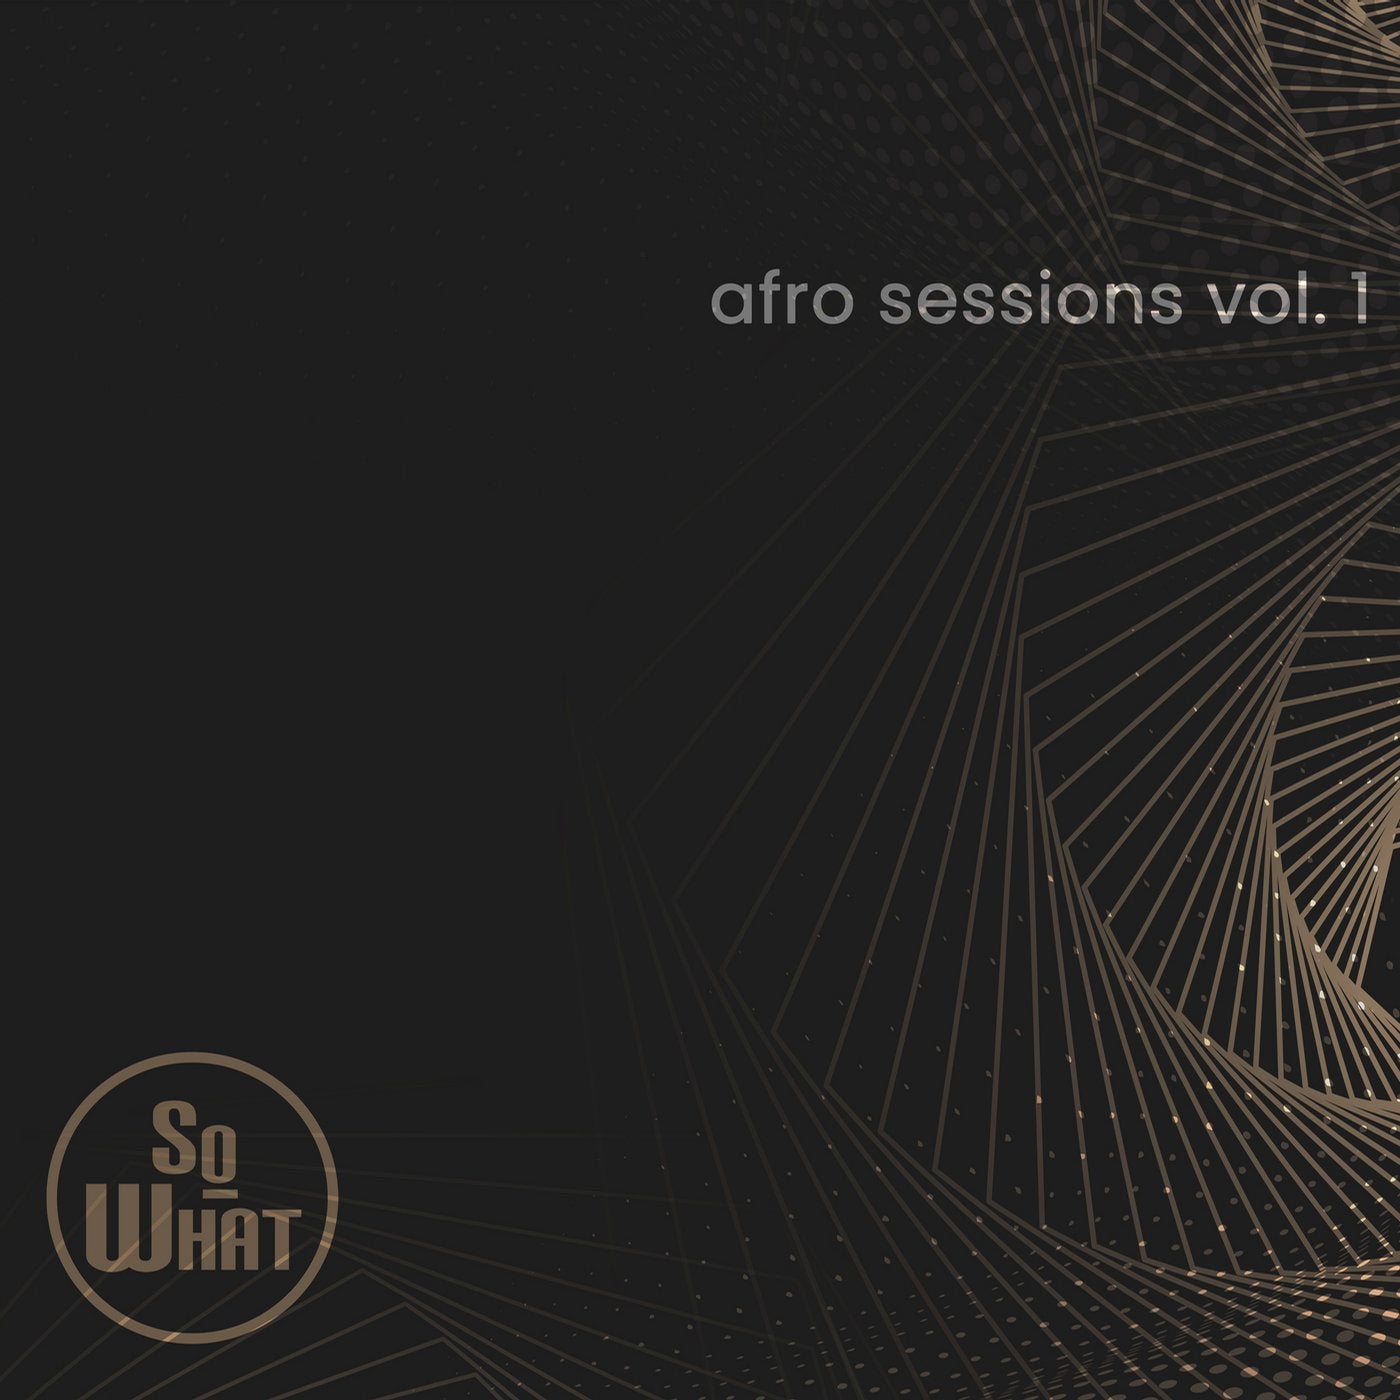 soWHAT Afro Sessions Vol. 1